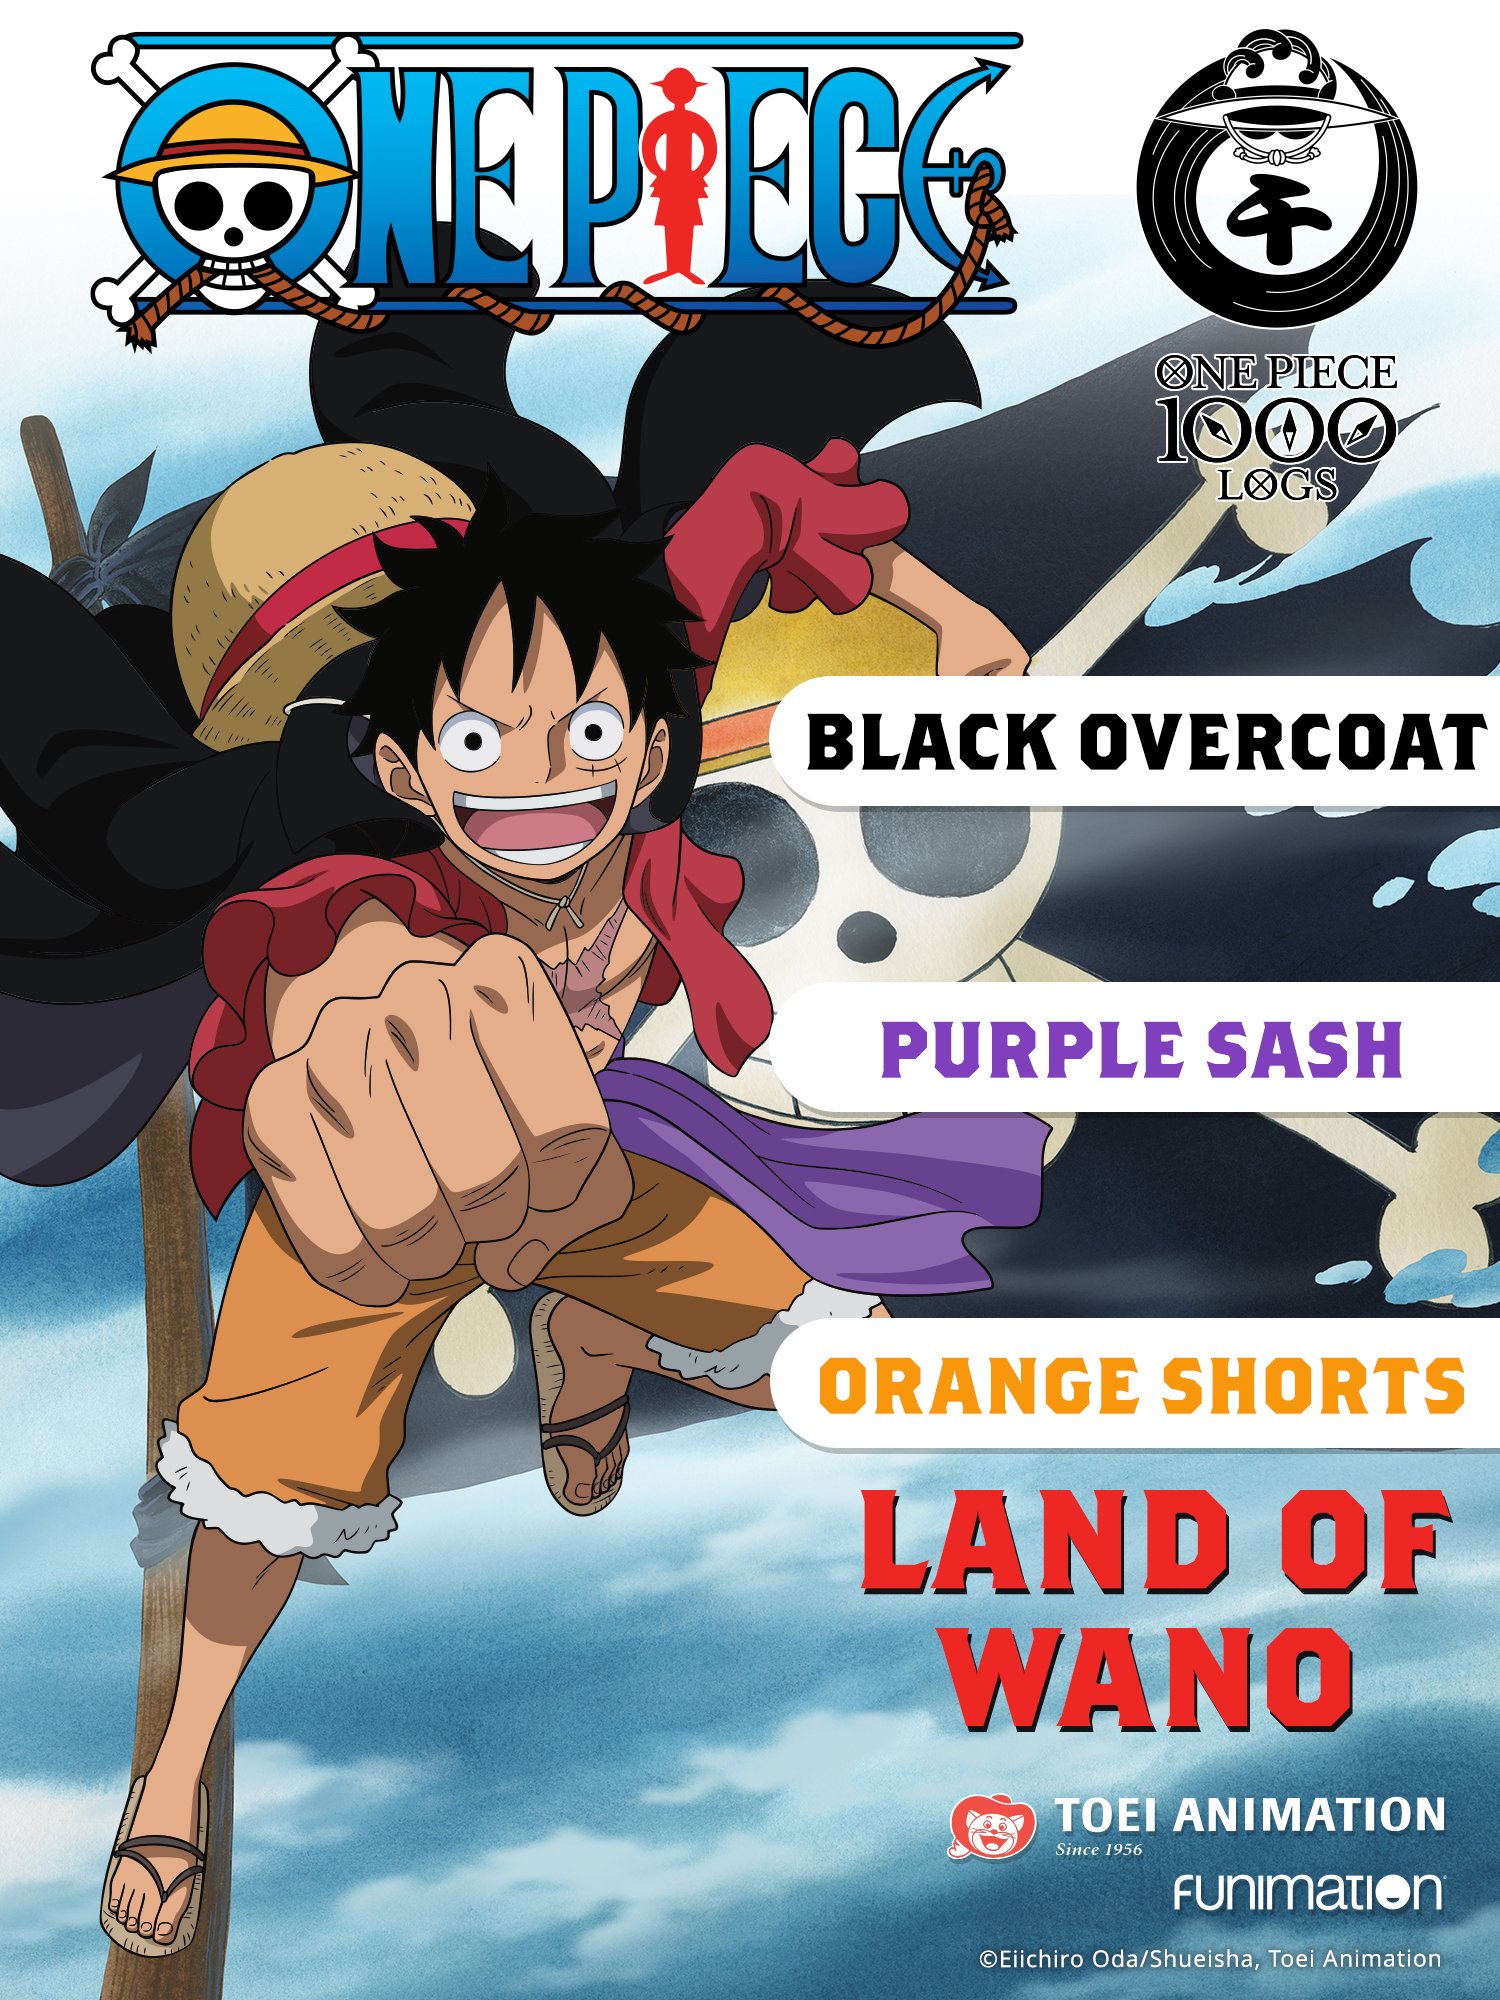 One Piece They Grow Up So Fast Luffy S Onigashima Fit Is A Fresh Take On His Og Clothes Ready For Episode 1000 Grab Your Best Outfit And Let S Go